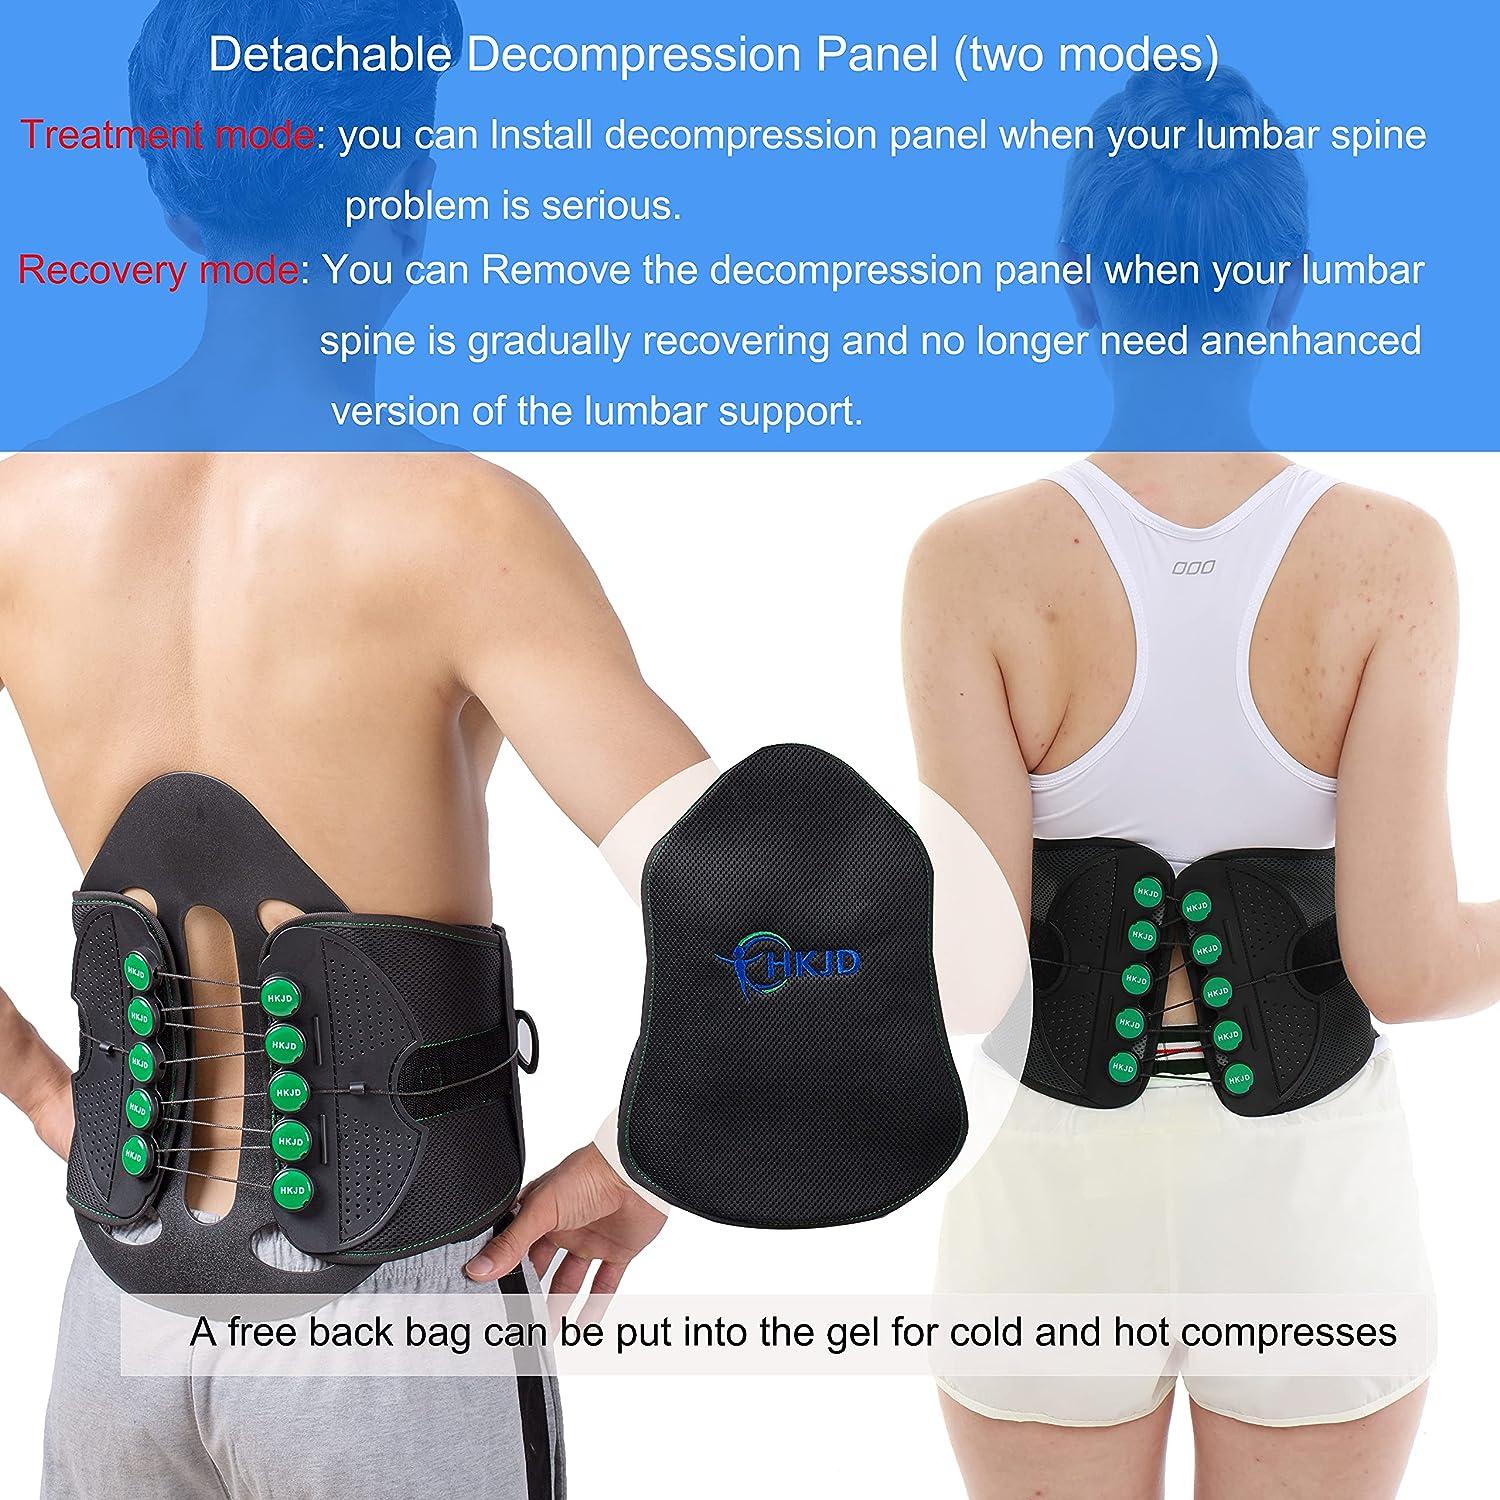  relieve back pain, sciatica pain relief, hip pain, back  support, lumbar support, back brace and strengthening. : Health & Household